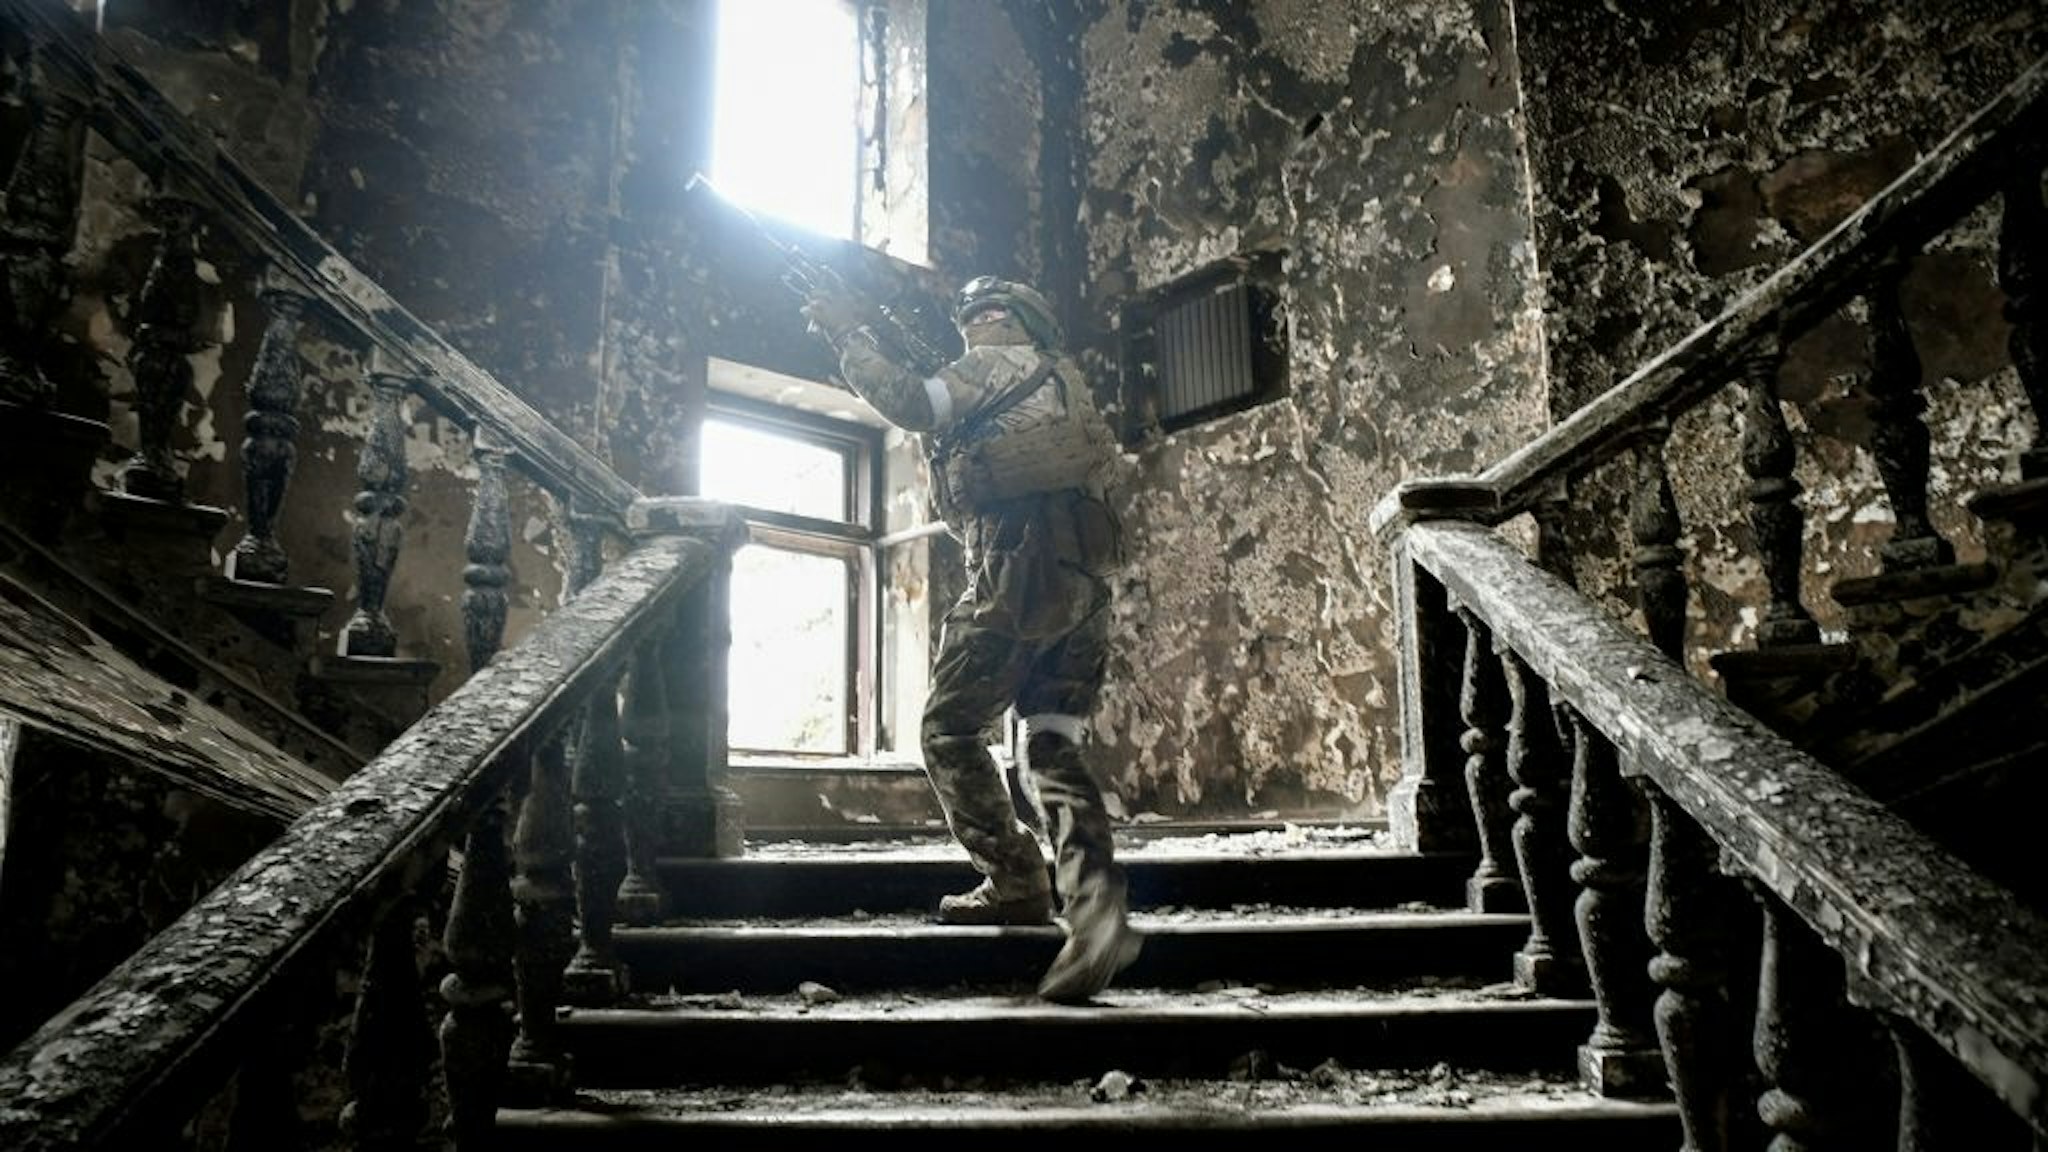 TOPSHOT-UKRAINE-RUSSIA-CONFLICT TOPSHOT - A Russian soldier climbs stairs at the Mariupol drama theatre, hit on March 16 by an airstrike, on April 12, 2022 in Mariupol, as Russian troops intensify a campaign to take the strategic port city, part of an anticipated massive onslaught across eastern Ukraine, while Russia's President makes a defiant case for the war on Russia's neighbour. - *EDITOR'S NOTE: This picture was taken during a trip organized by the Russian military.* (Photo by Alexander NEMENOV / AFP) (Photo by ALEXANDER NEMENOV/AFP via Getty Images) ALEXANDER NEMENOV / Contributor